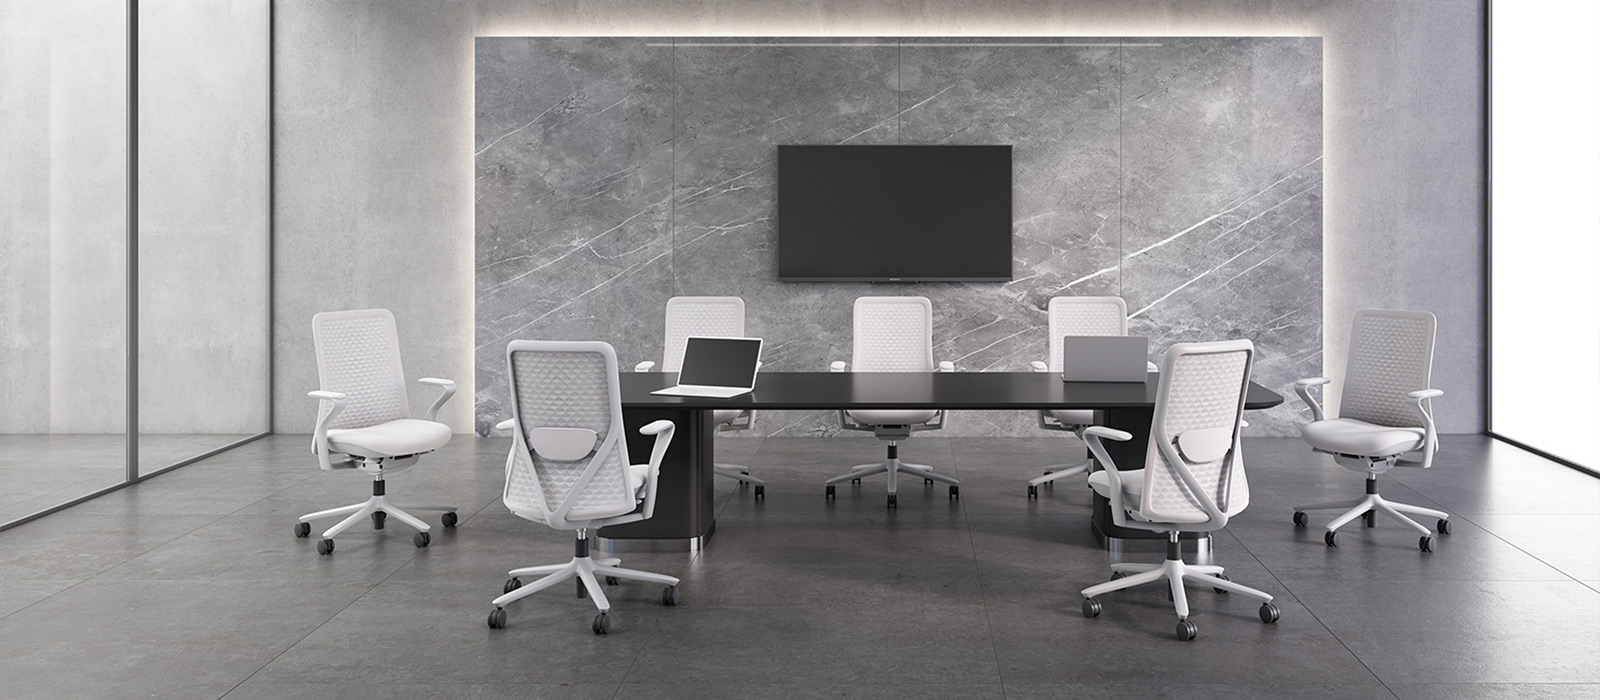 Workaholic™ Premium Poly chair - Meeting room